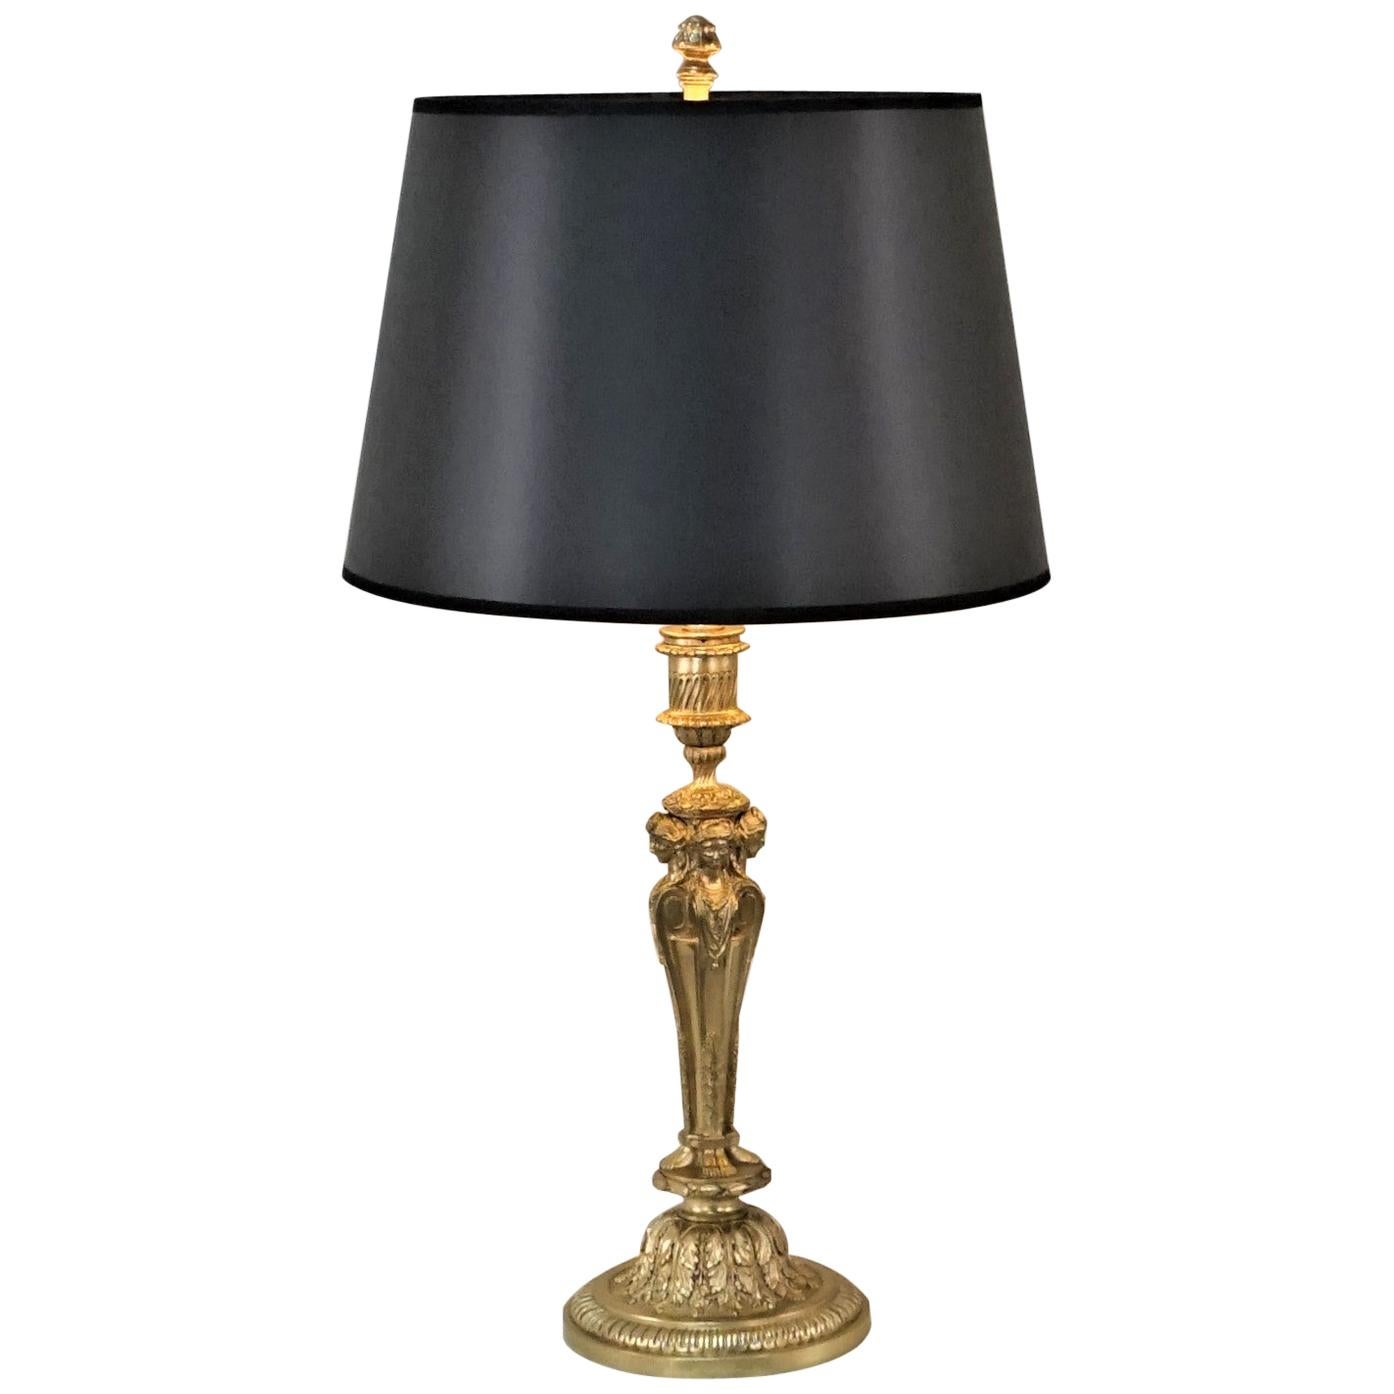 French Empire Style Bronze Desk or Table Lamp